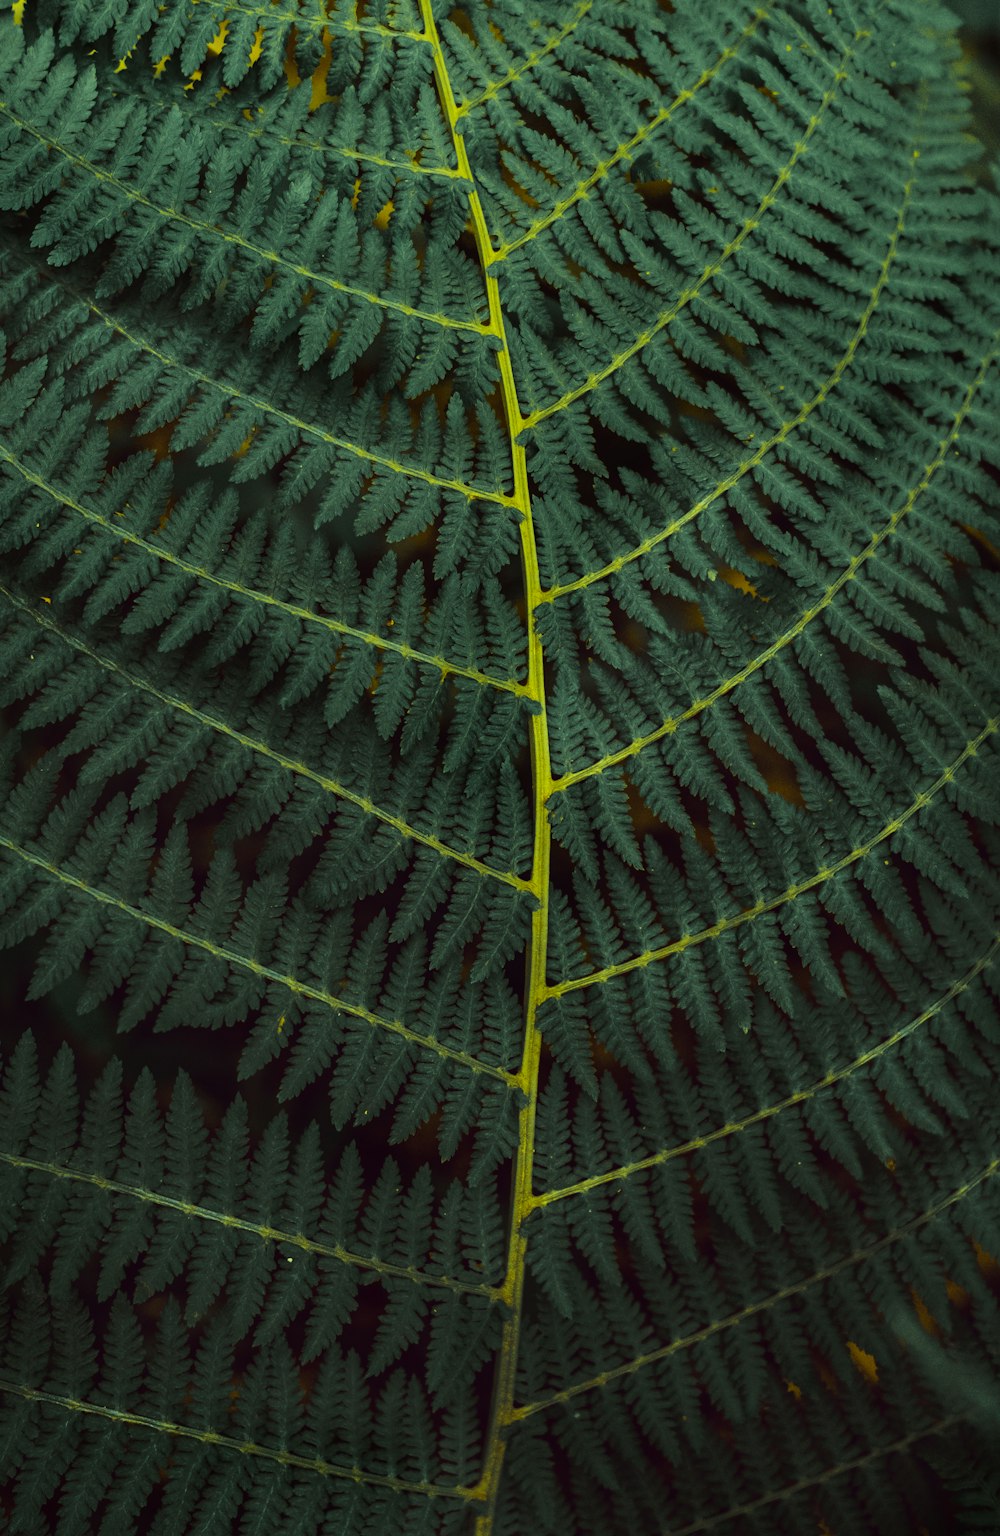 a close up of a green leaf with yellow lines